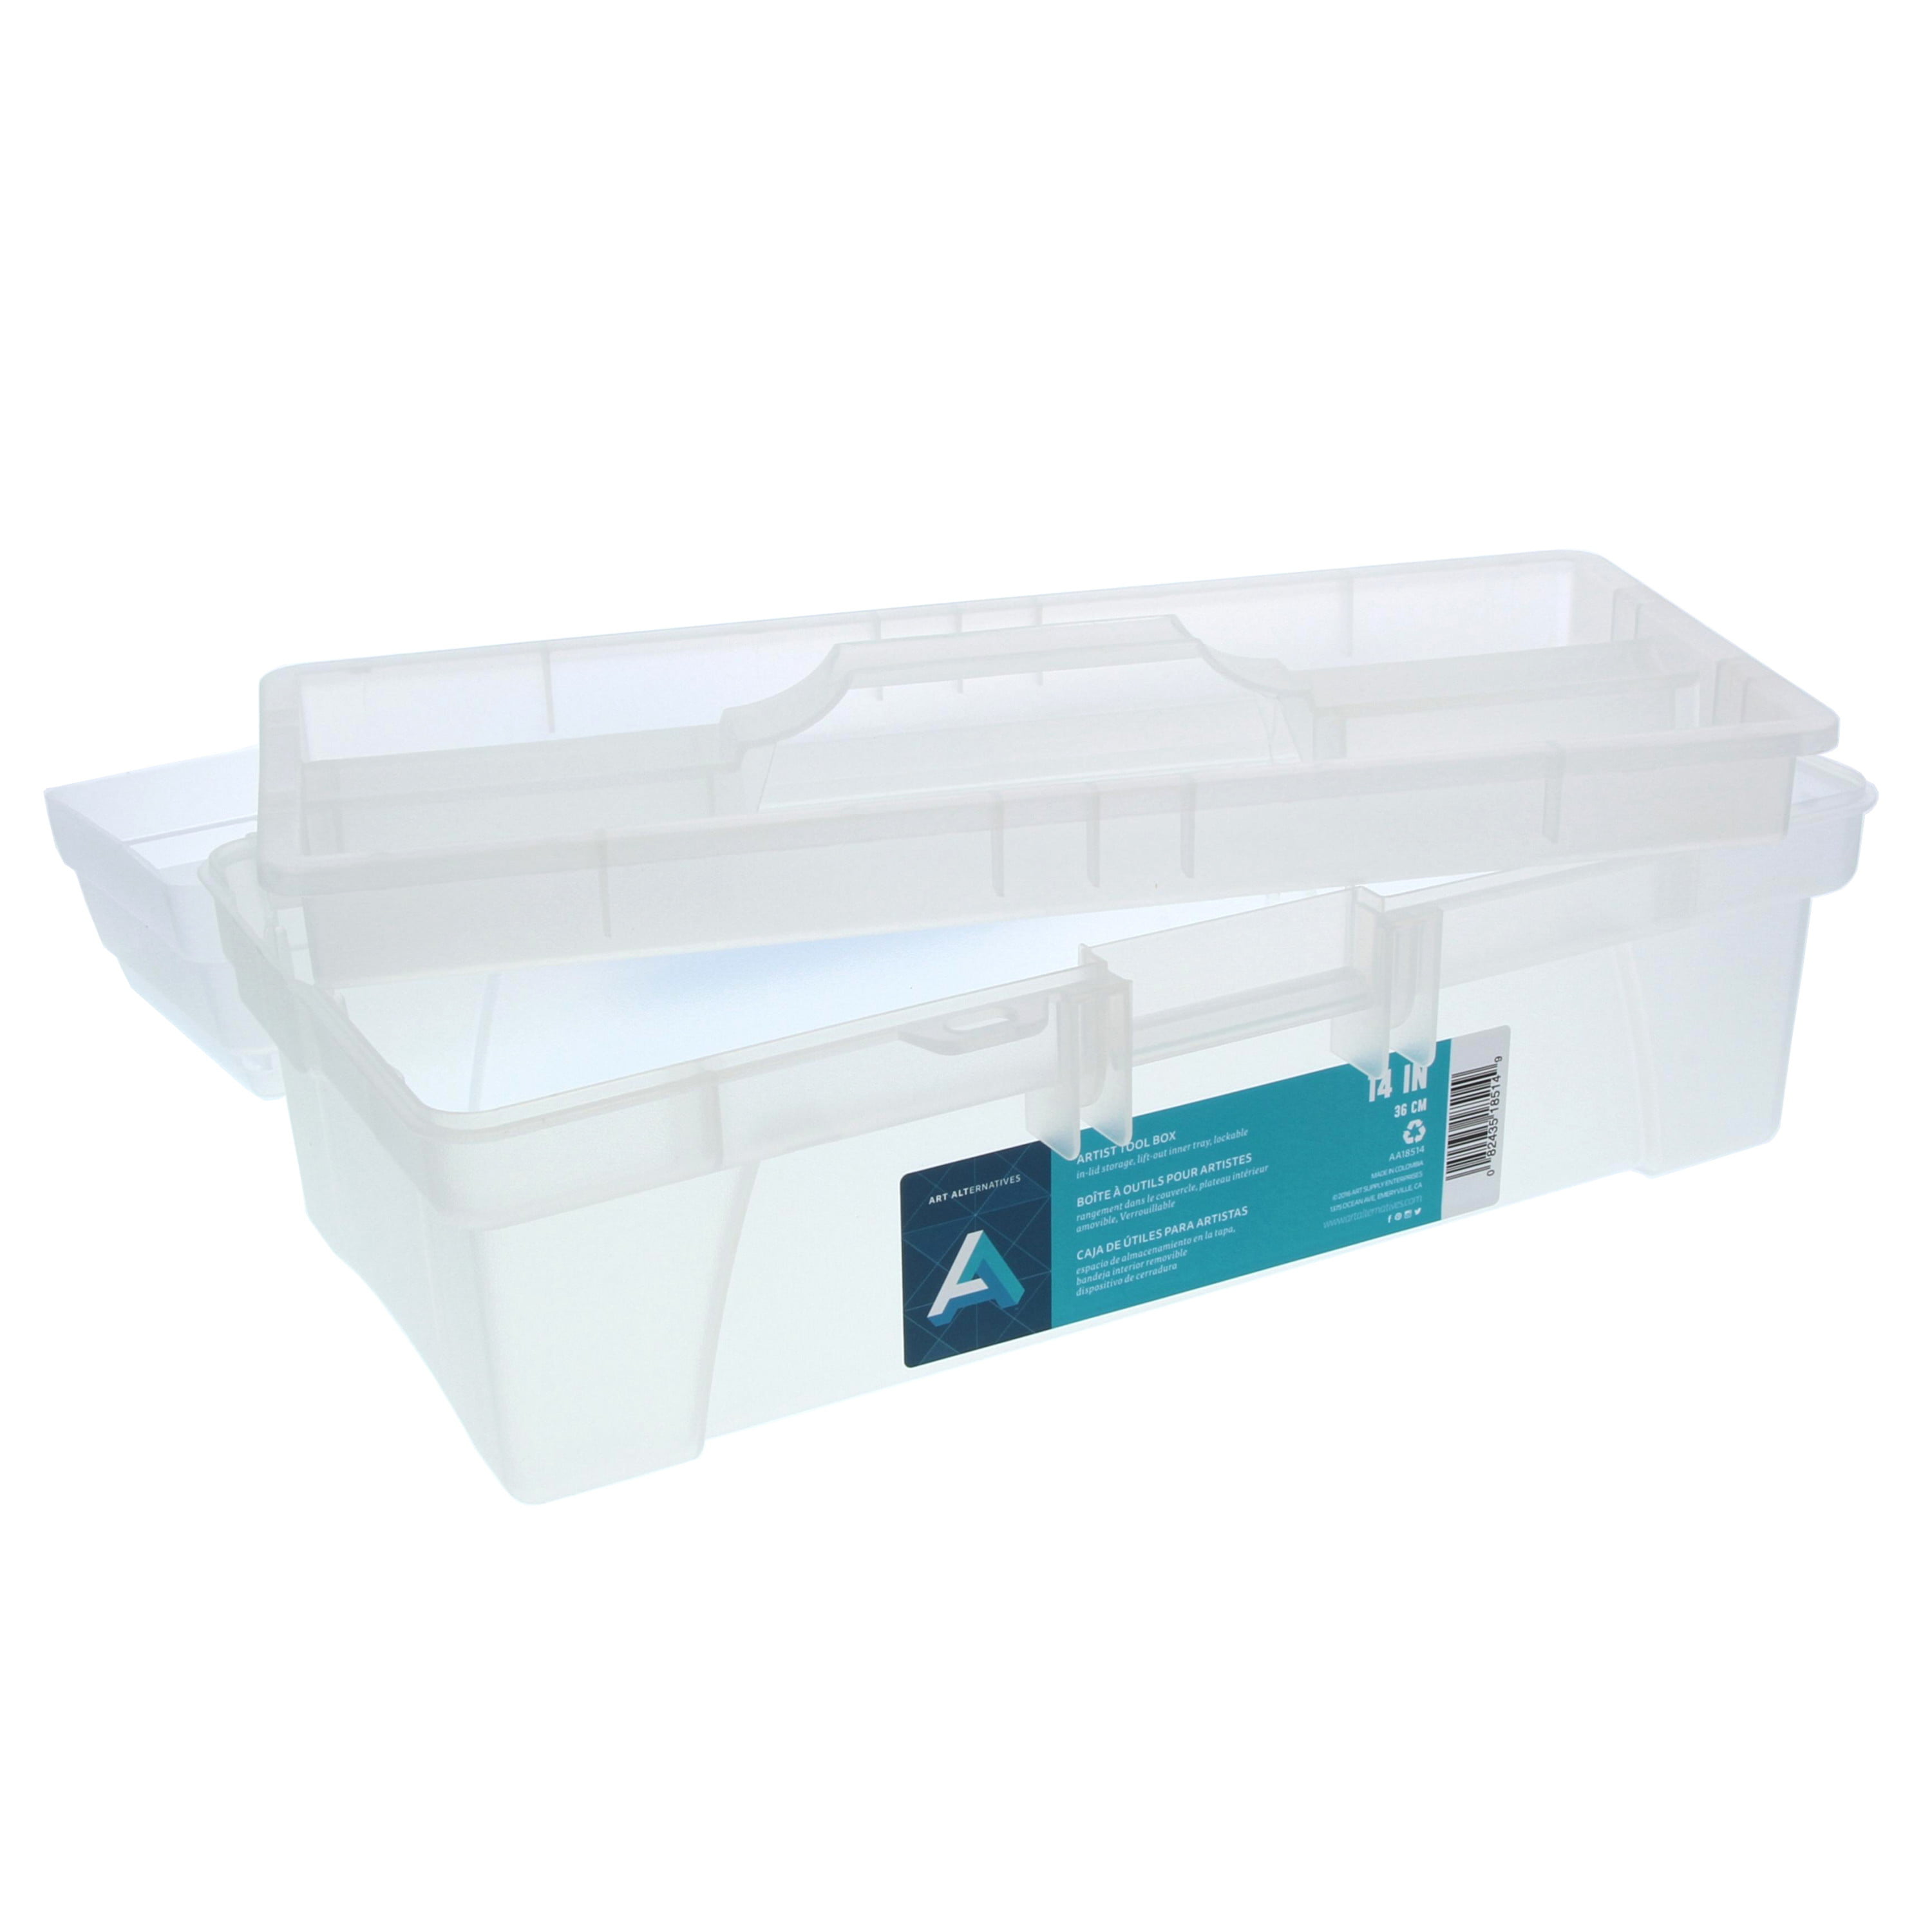 Medium Multi-function Storage Box with Lift Out Trays - MEEDEN Art